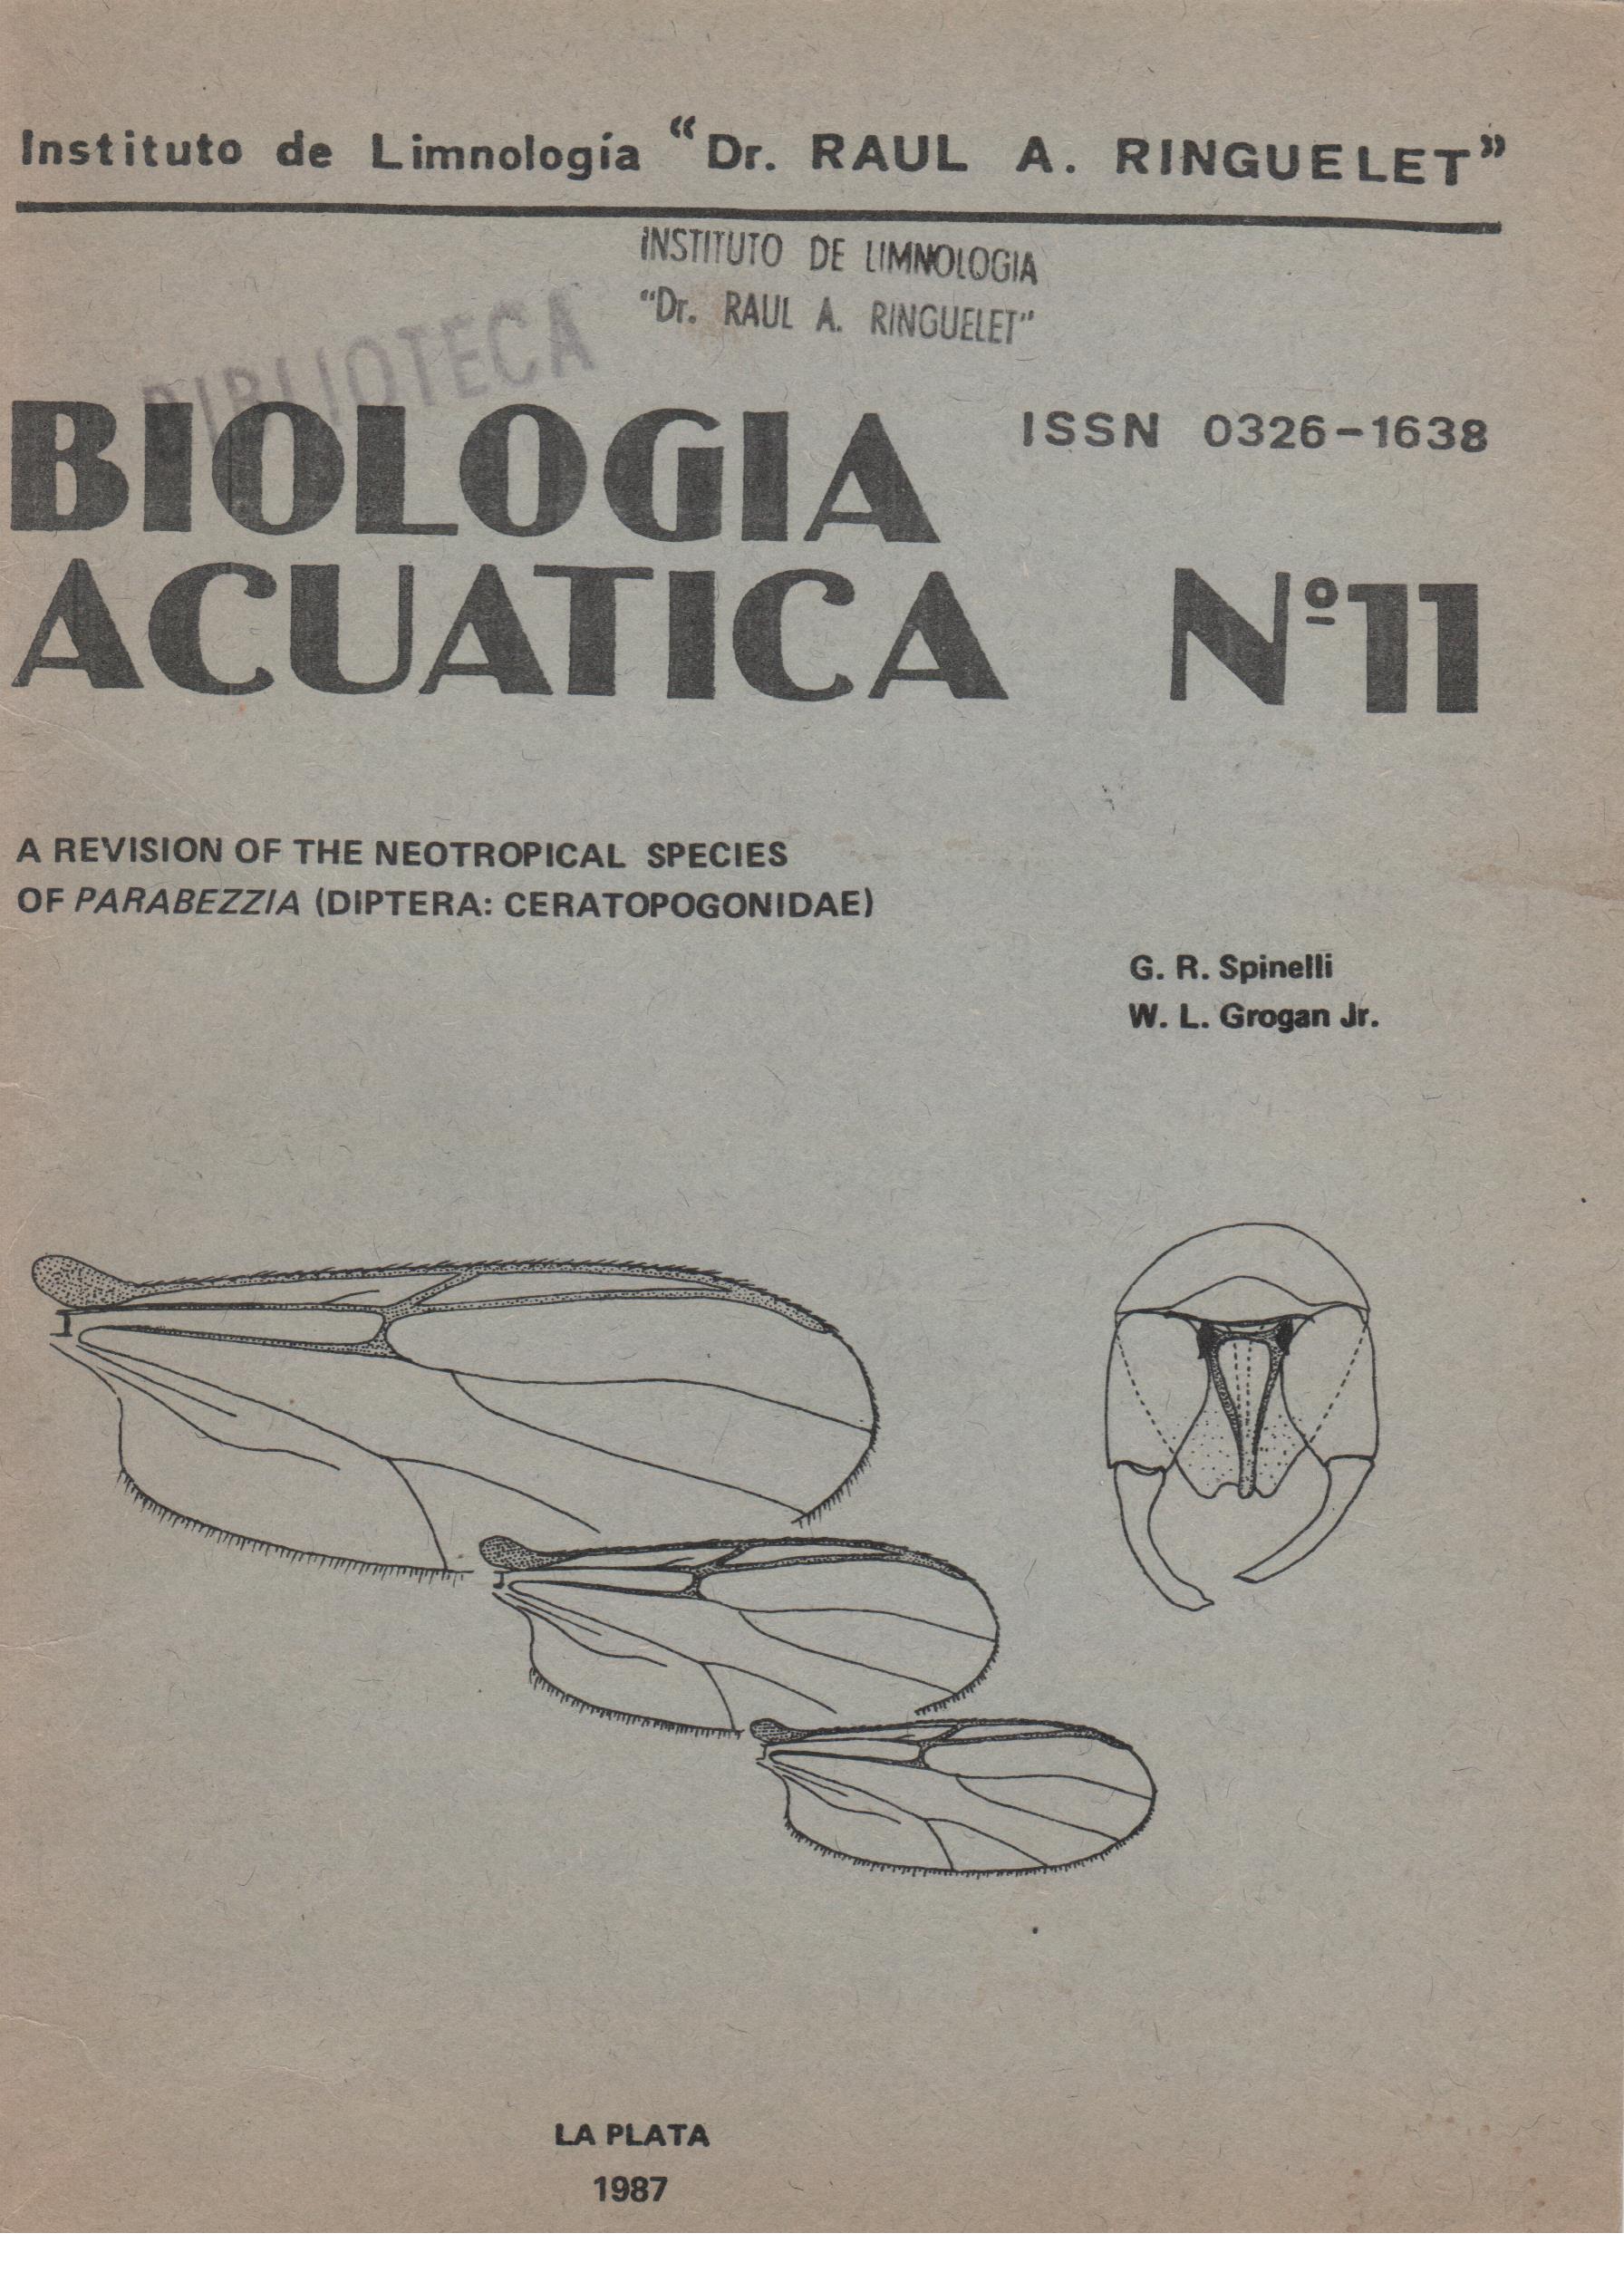 					Ver Núm. 11 (1987): A revision of the Neotropical species of Parabezzie (Diptera: Ceratopogonidae)
				